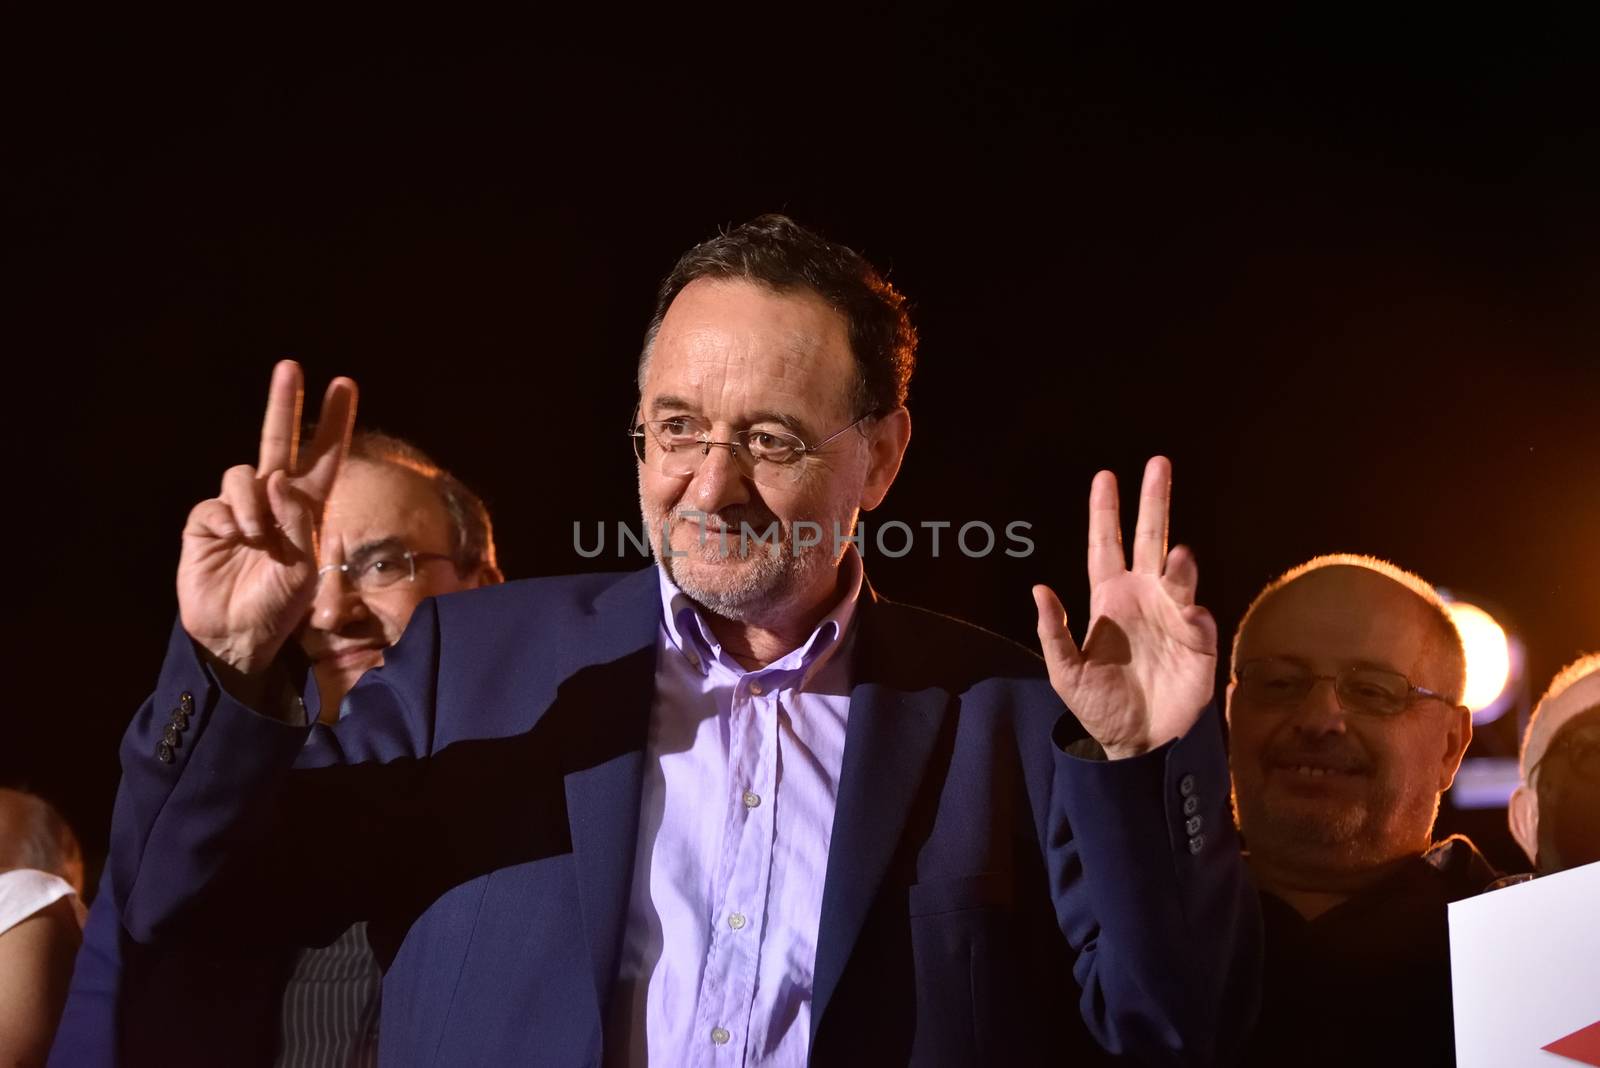 GREECE, Athens: Popular Unity party leader Panagiotis Lafazanis addresses crowds at the party's main pre-election rally in Athens on September 15, 2015. Greece's snap election takes place on September 20, with Syriza leader Alexis Tsipras and New Democracy's Evangelos Meimarakis the frontrunners.